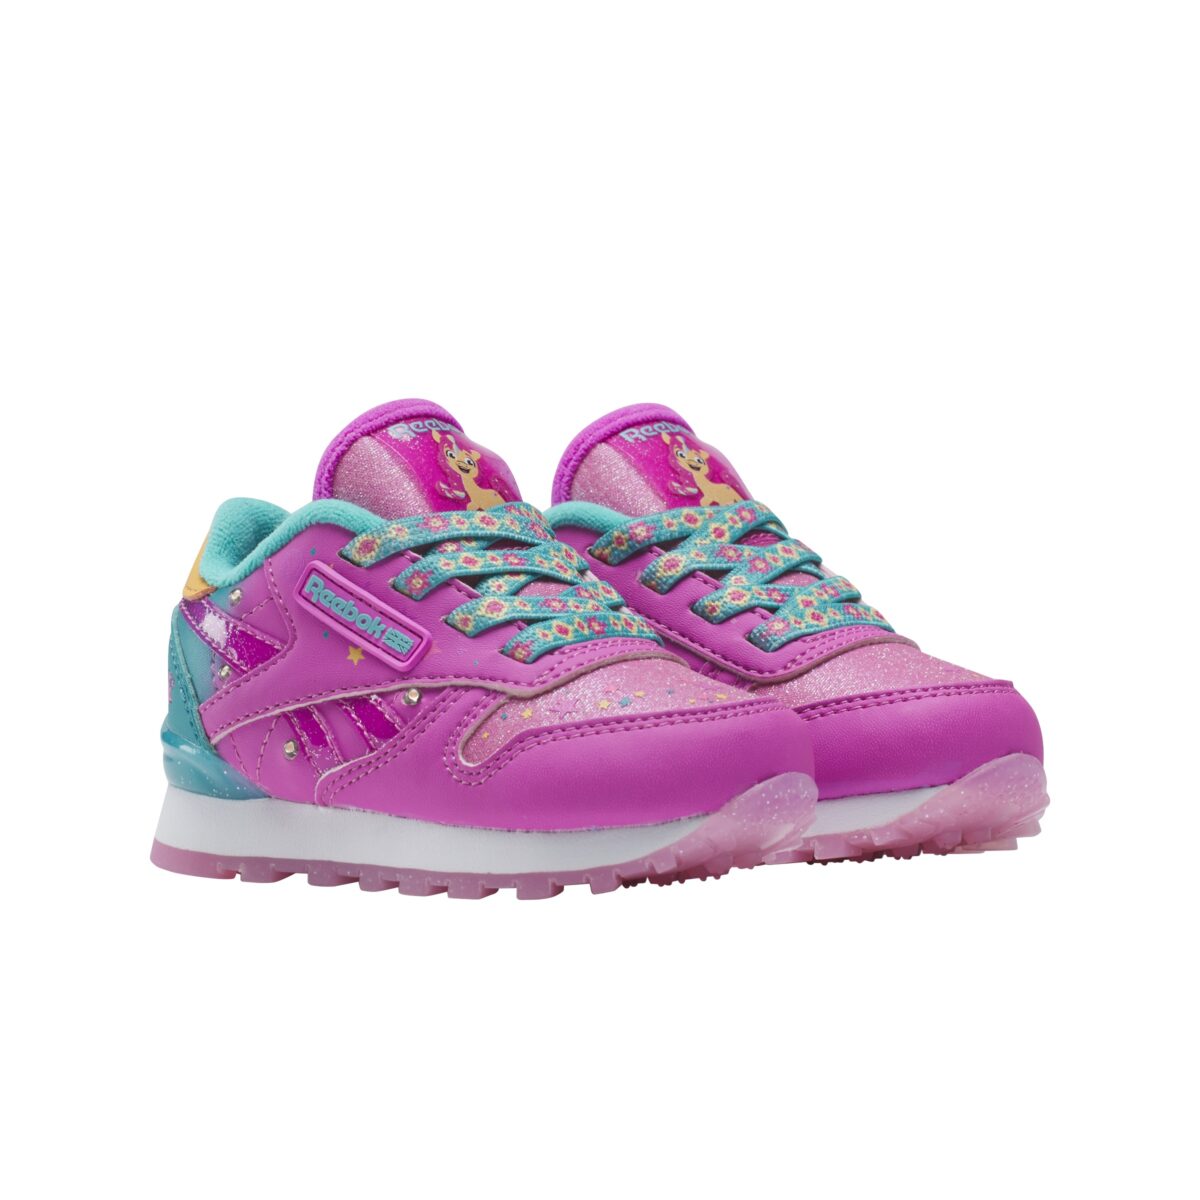 My Little Pony x reebok Woven Classic Leather Collection